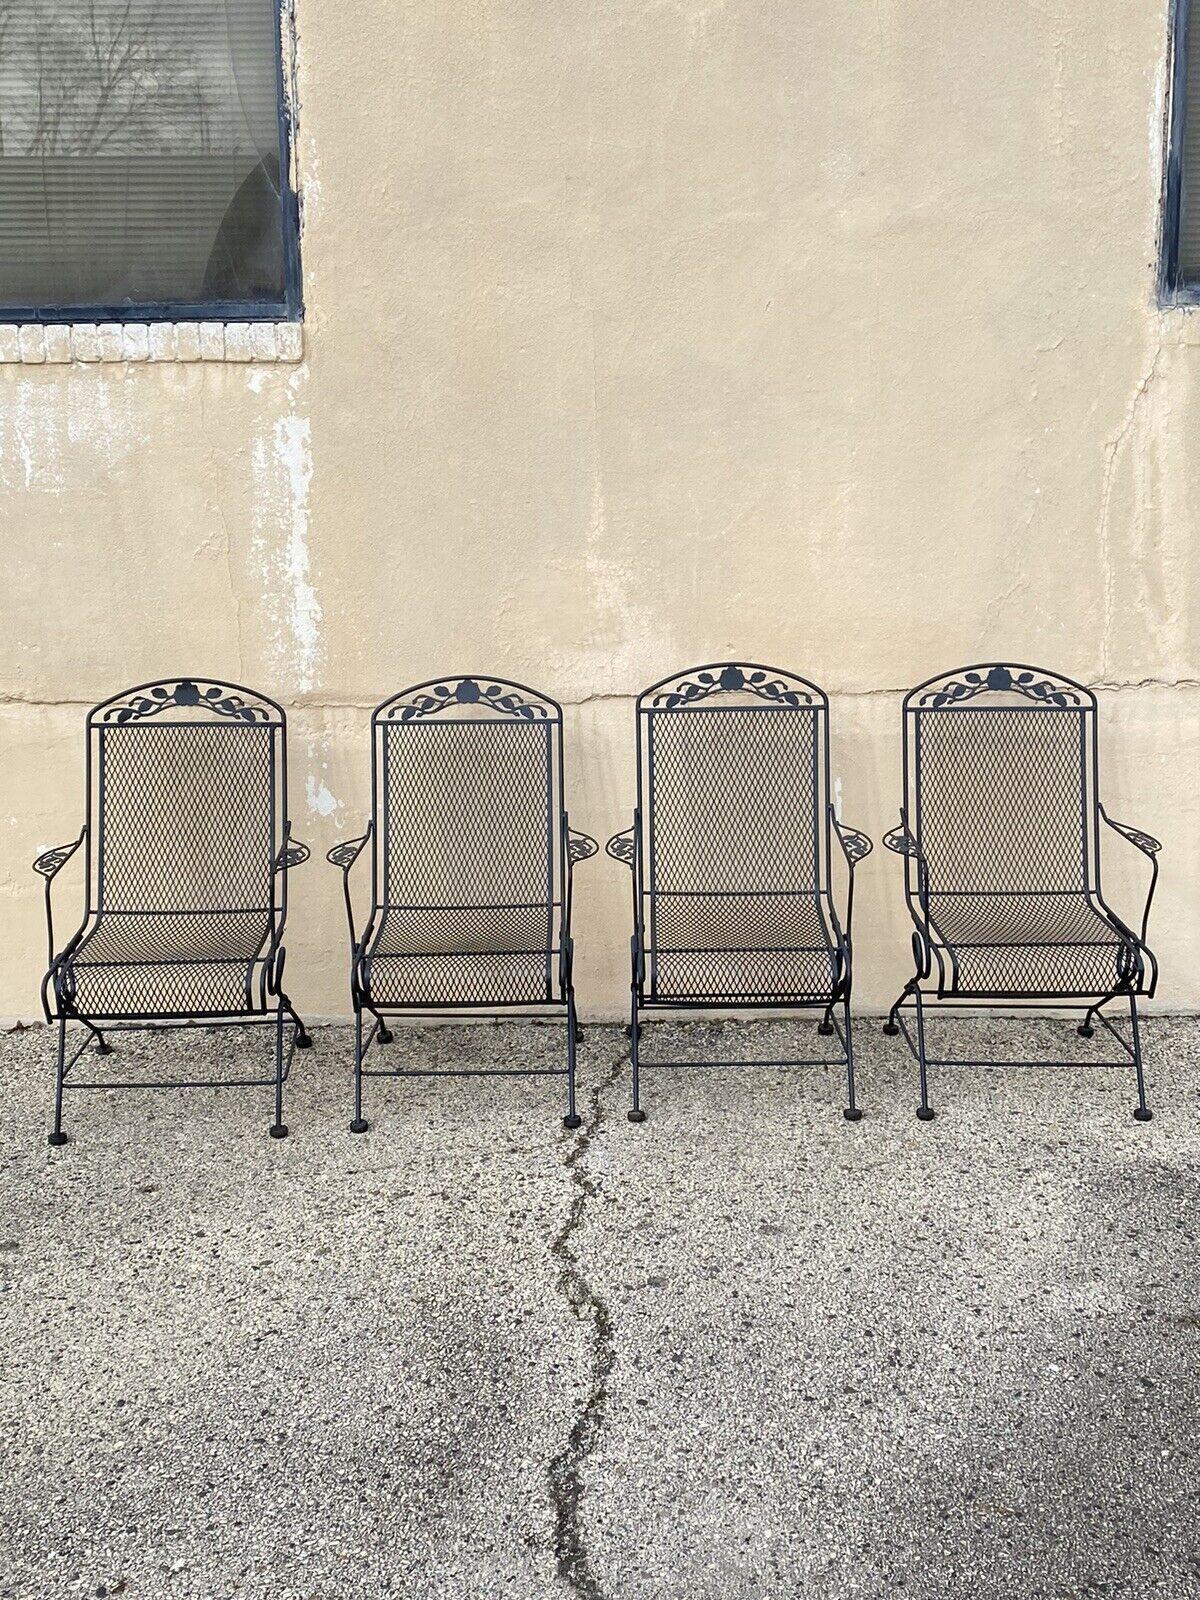 Vintage Woodard Wrought Iron Rose Pattern Springer Patio Arm Chairs - Set of 4. Circa Late 20th to Early 21st Century. Dimensions : 39,5